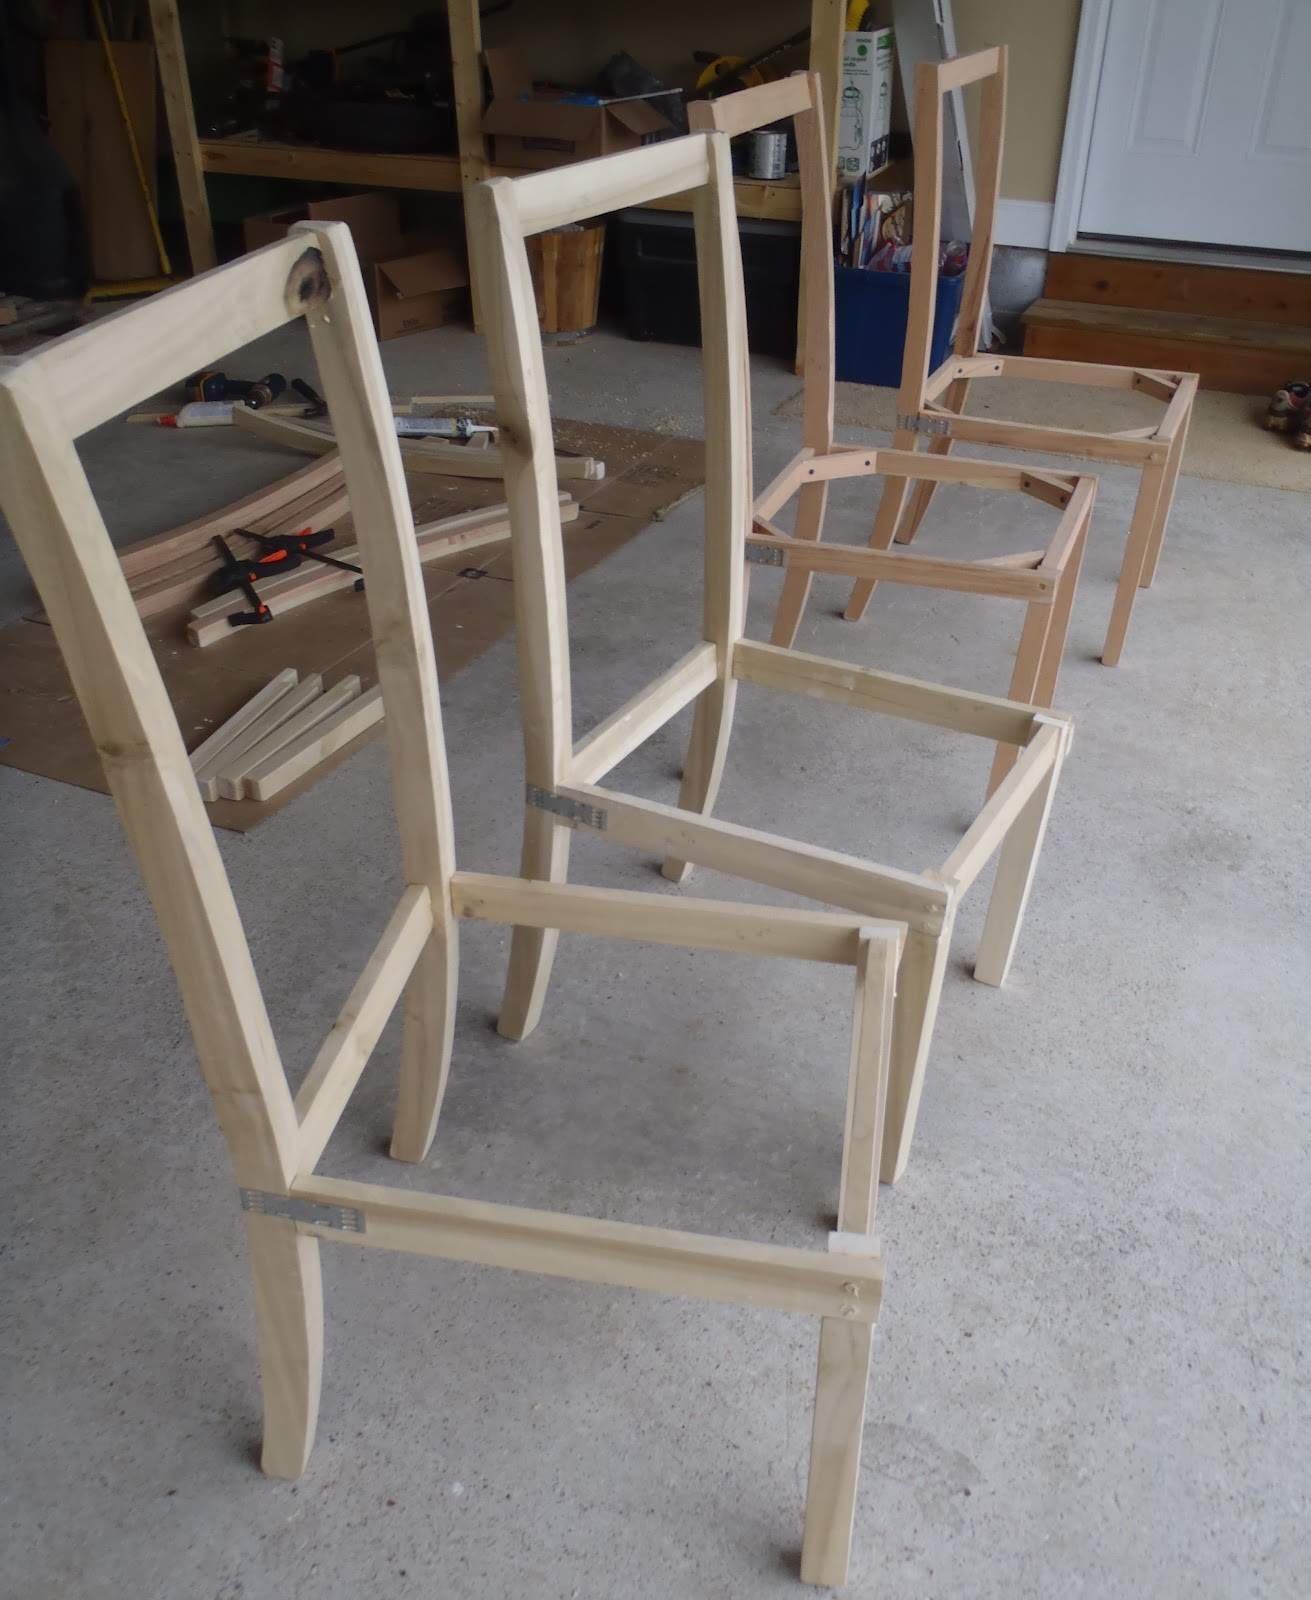 DIY Wood Chair Plans
 Lazy Liz on Less Dining chairs halfway done